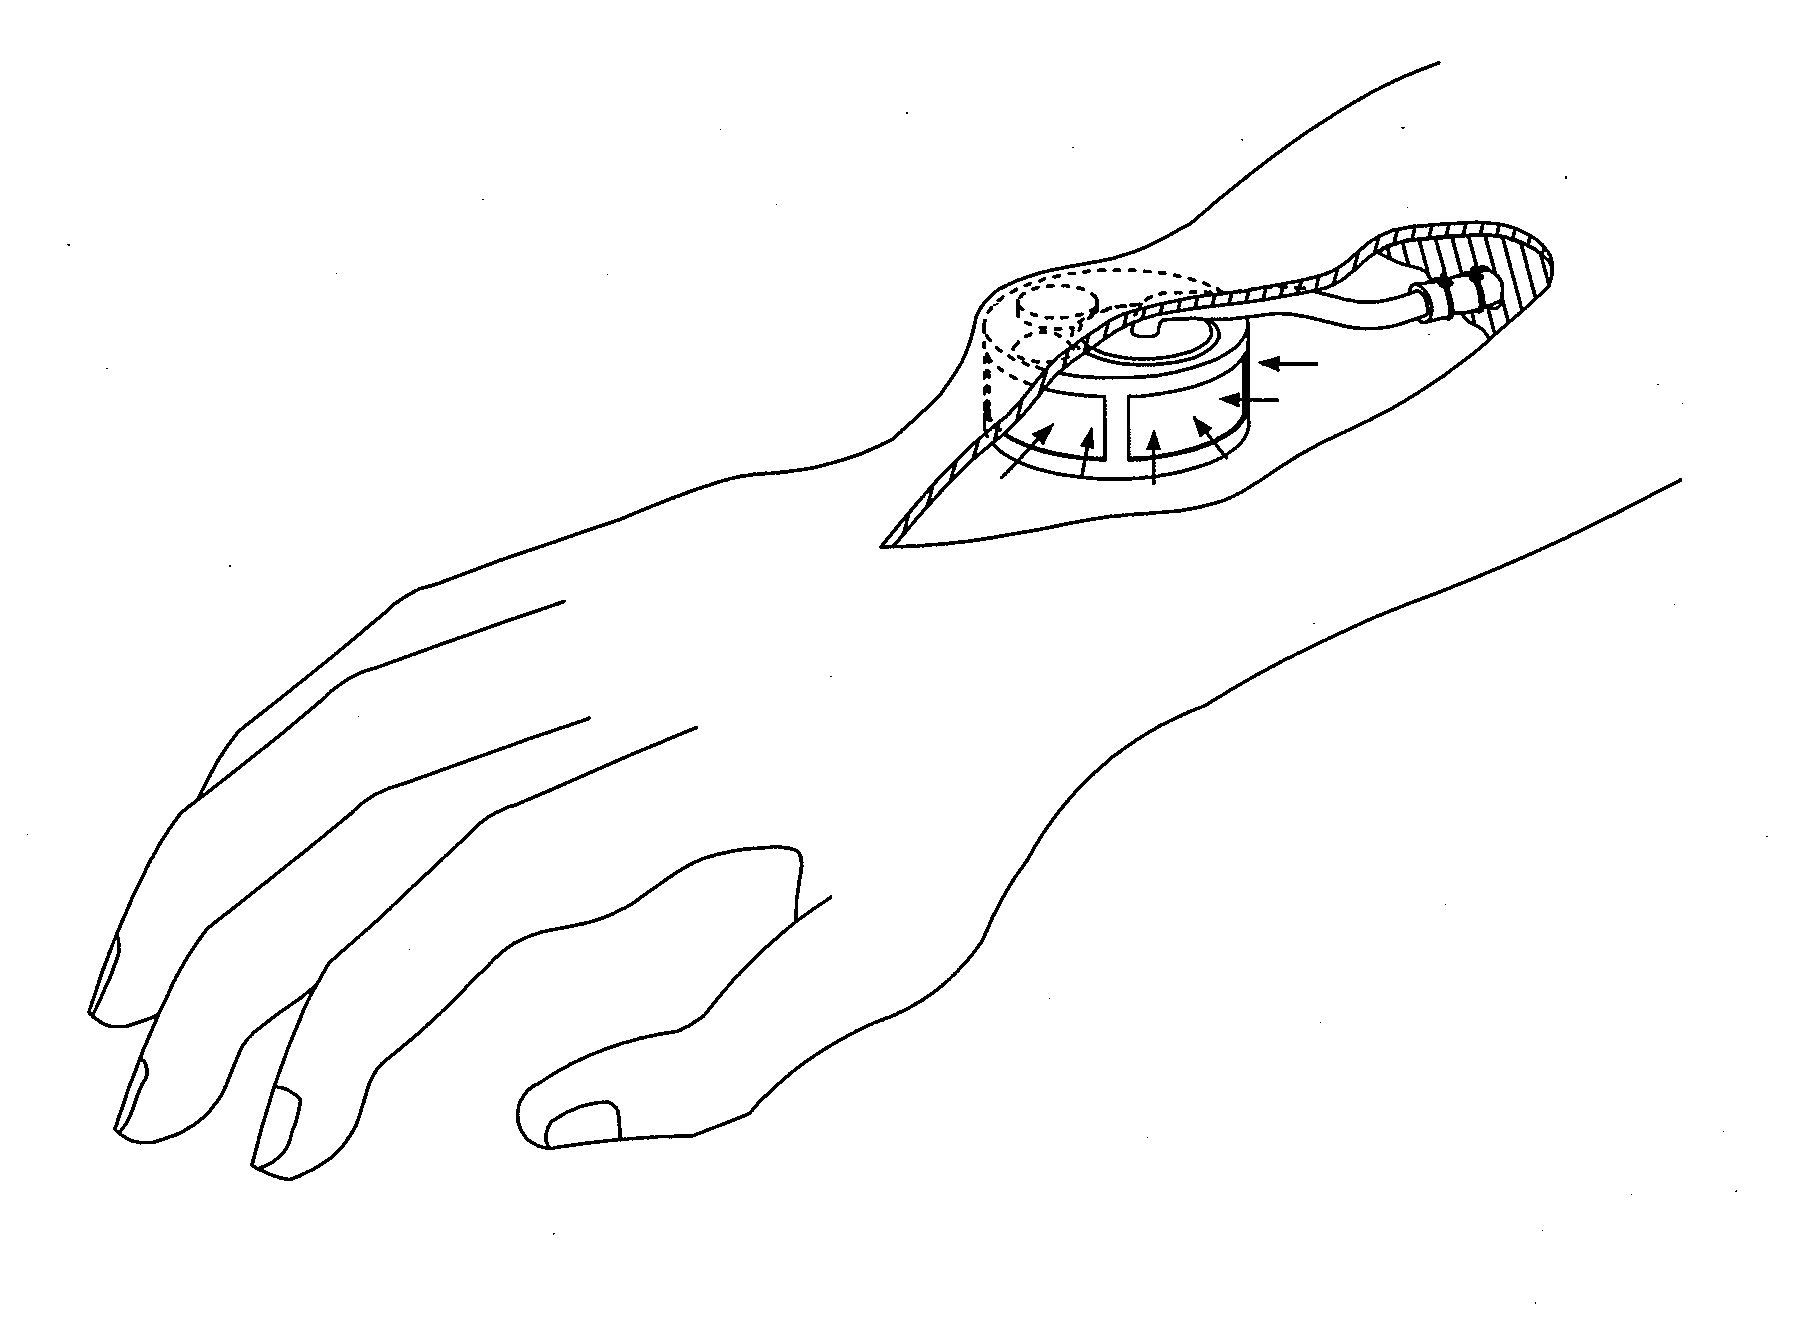 Device for draining lymph into vein